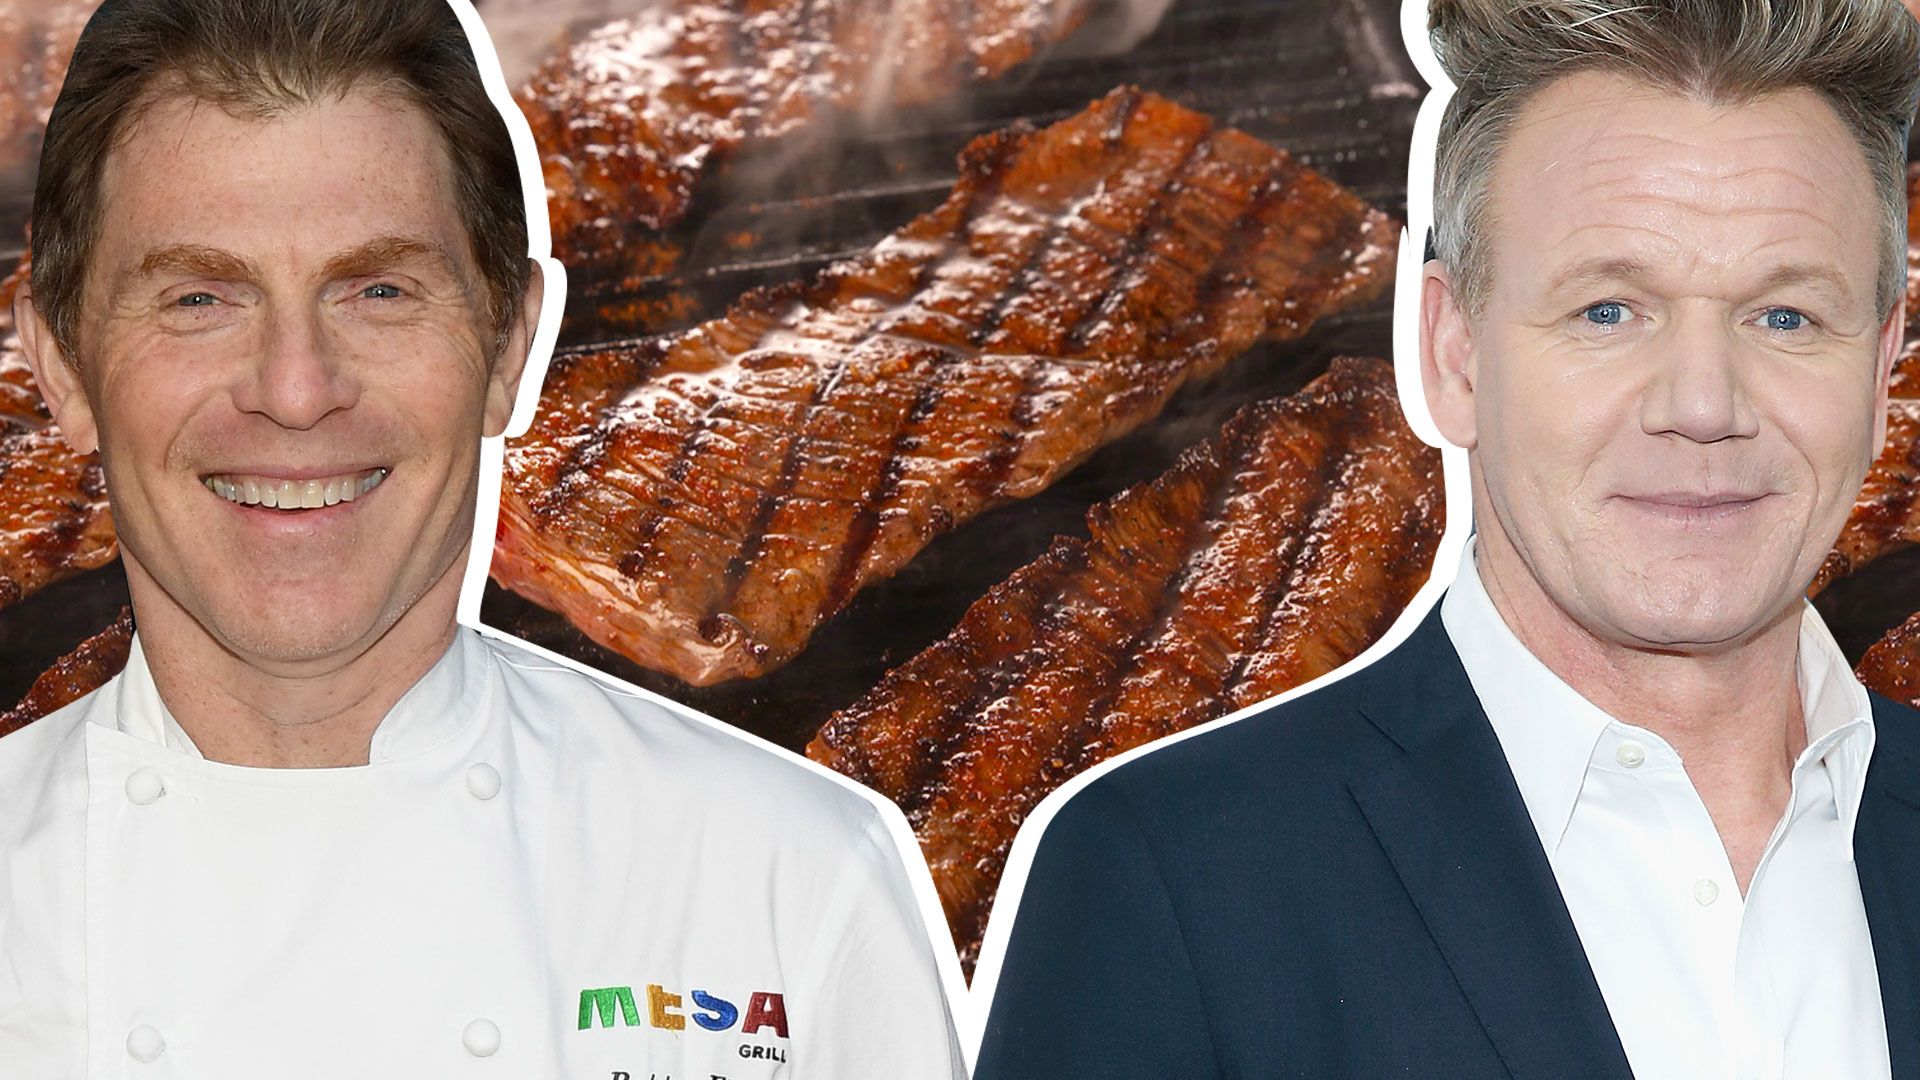 Gordon Ramsay Vs. Bobby Flay: Whose Grilled Steak Is Better?